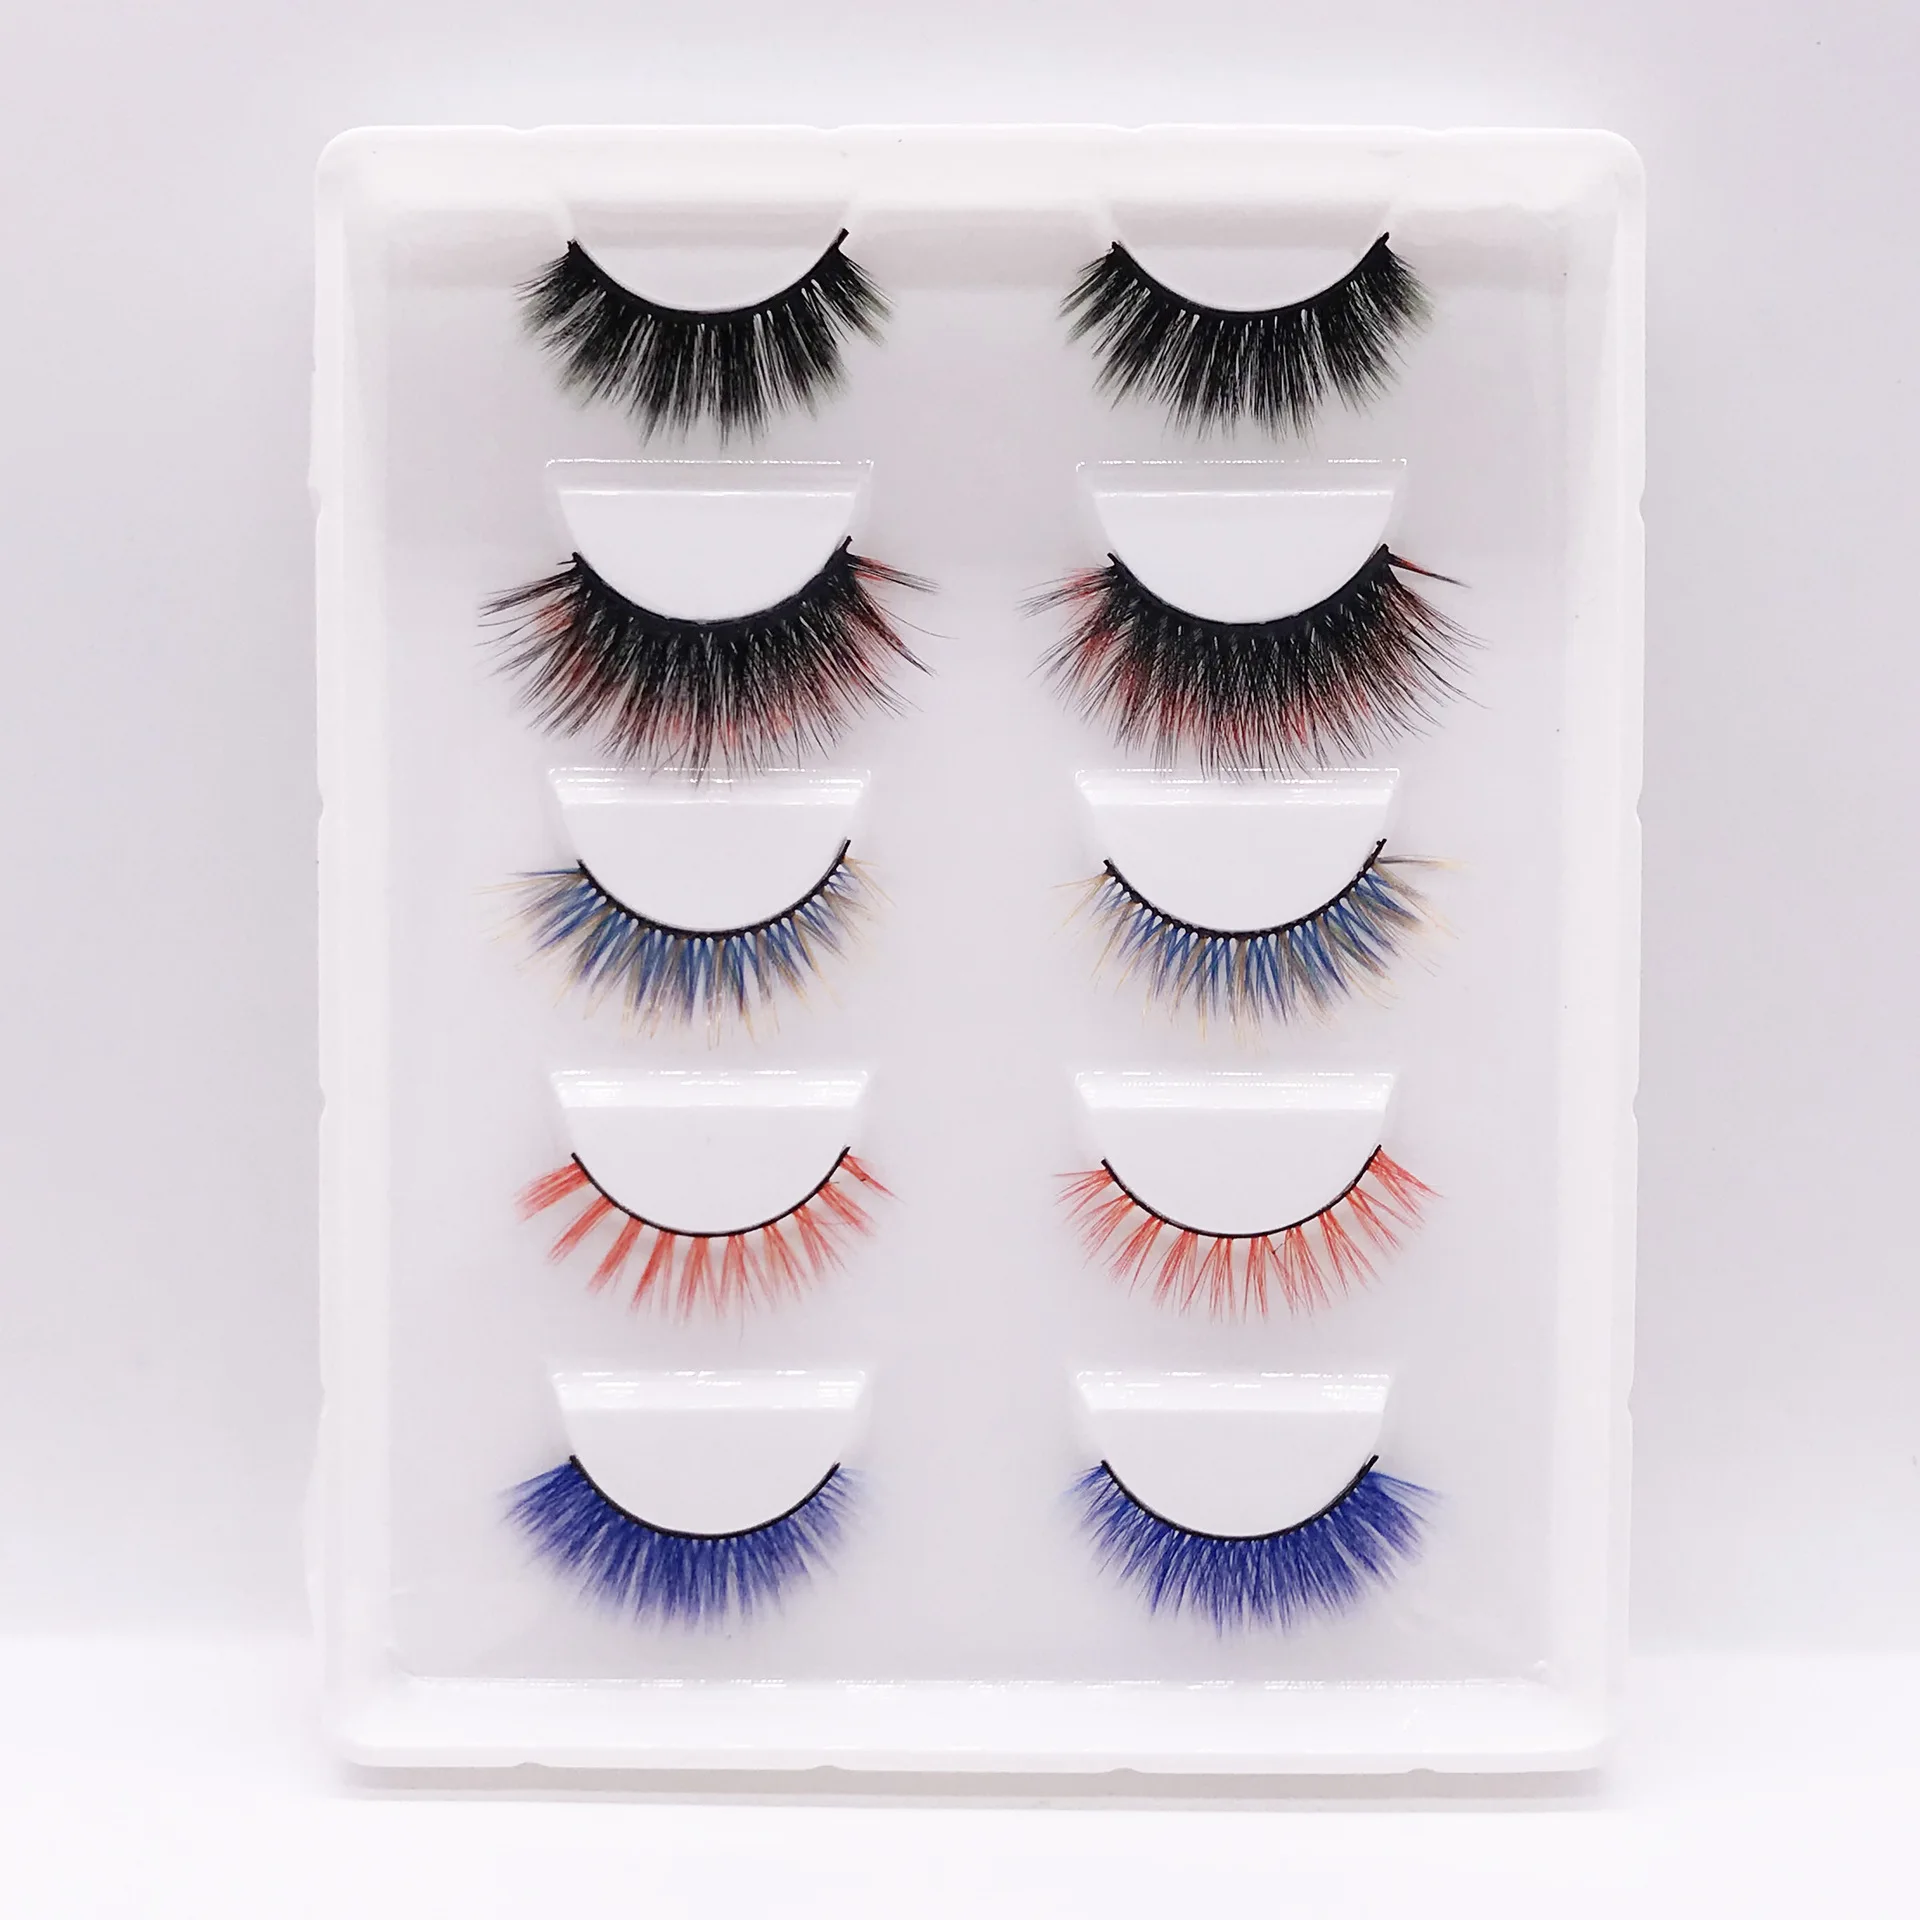 

Vegan tresluces lashes rodan field lash boost 5 pair fluffy colored lashes mink vendor fair and lovely by unilever eyelashes